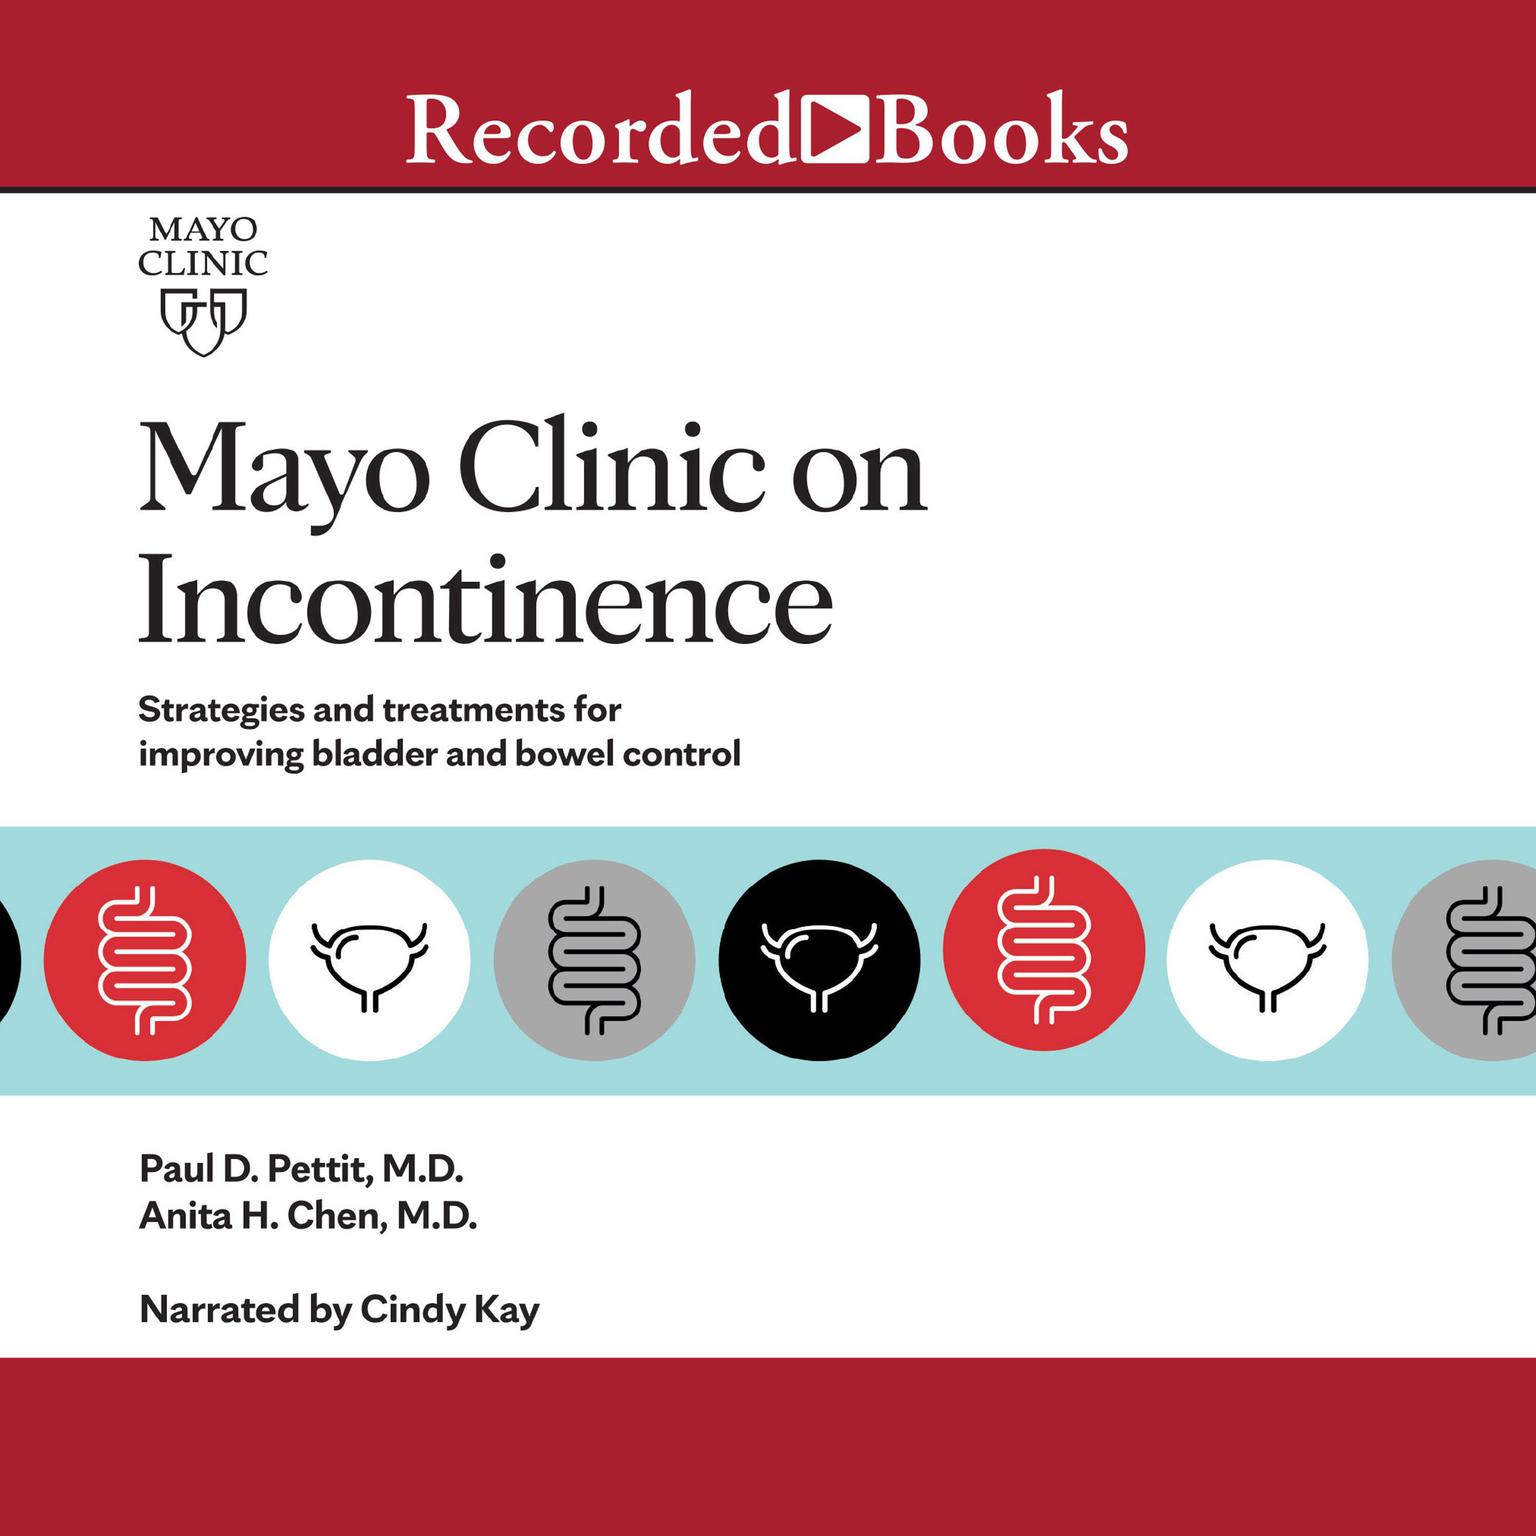 Mayo Clinic on Incontinence: Strategies and treatments for improving bowel and bladder control Audiobook, by Anita H. Chen